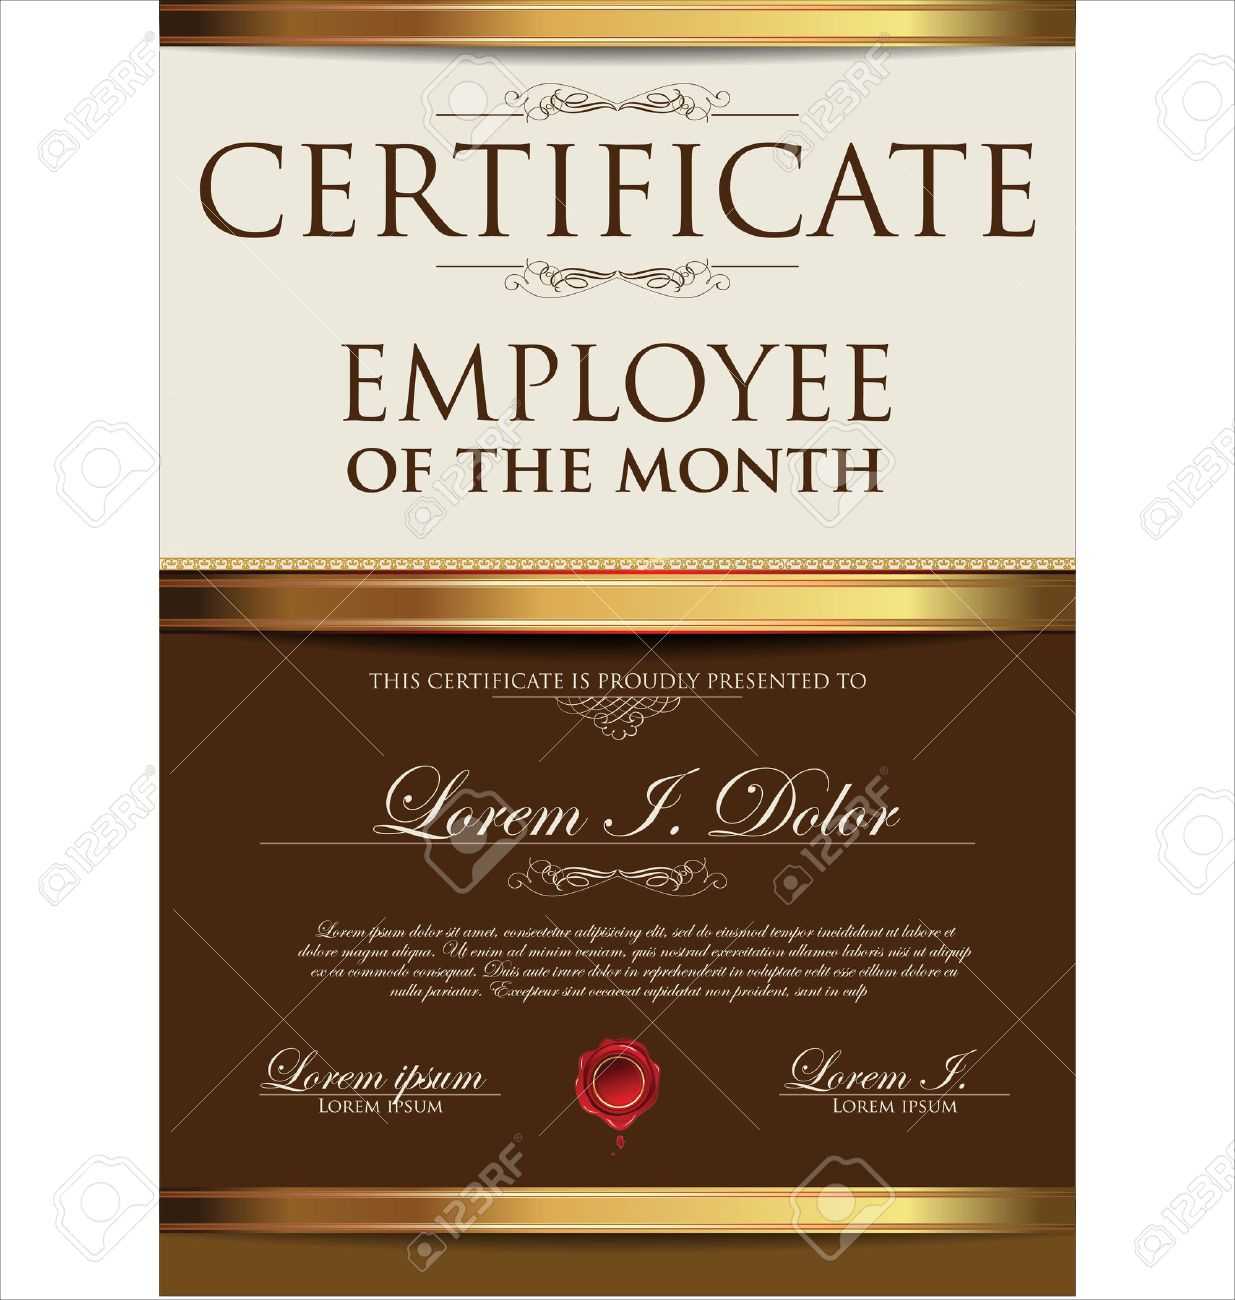 Certificate Template, Employee Of The Month With Manager Of The Month Certificate Template